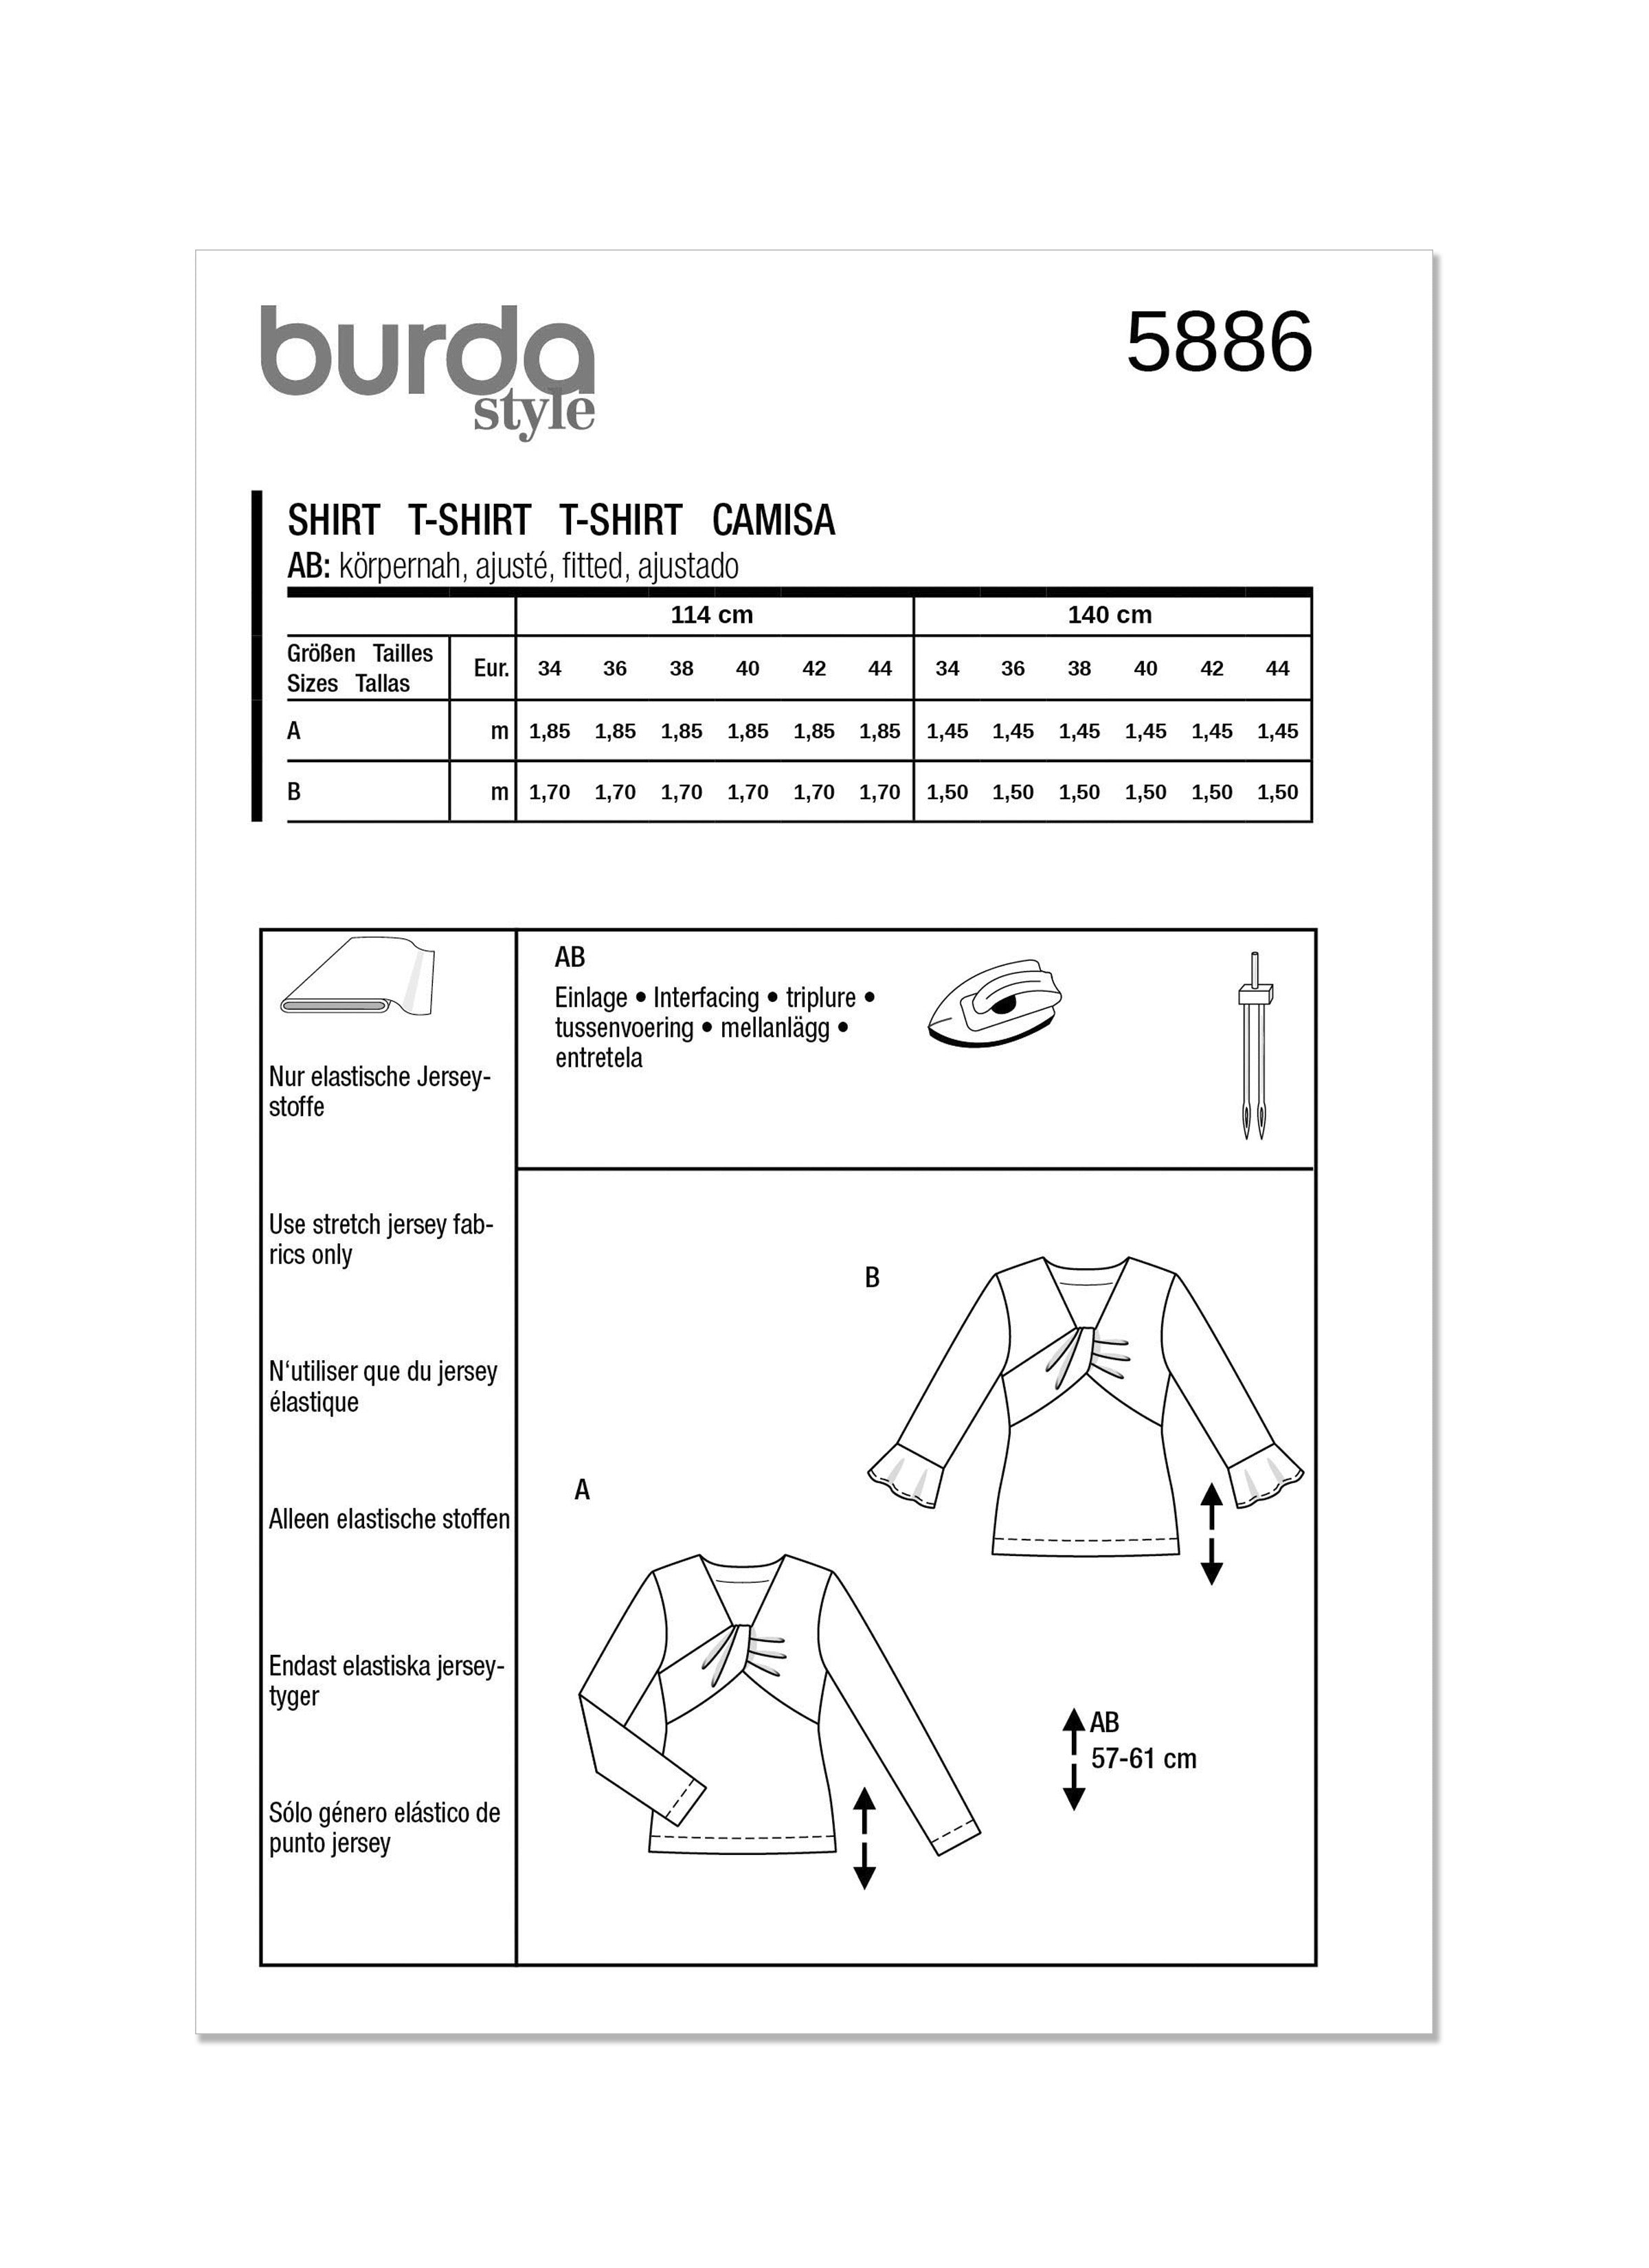 Burda Sewing Pattern 5886 Misses' Top from Jaycotts Sewing Supplies